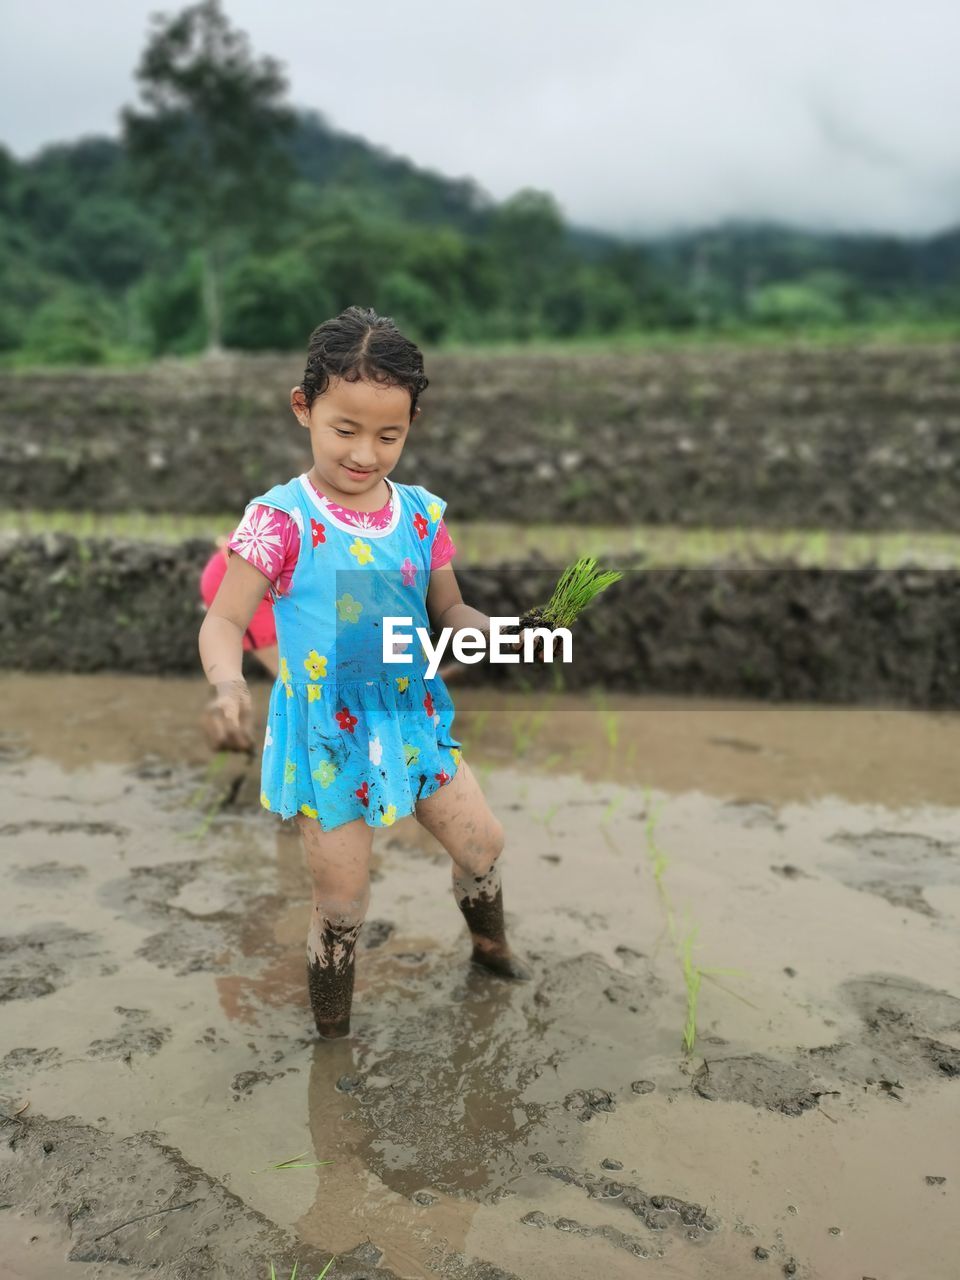 childhood, child, one person, full length, beach, nature, land, front view, happiness, sky, water, smiling, emotion, female, cute, person, casual clothing, innocence, sea, outdoors, sand, day, dirt, clothing, men, leisure activity, portrait, holding, women, lifestyles, toddler, spring, environment, mud, standing, looking at camera